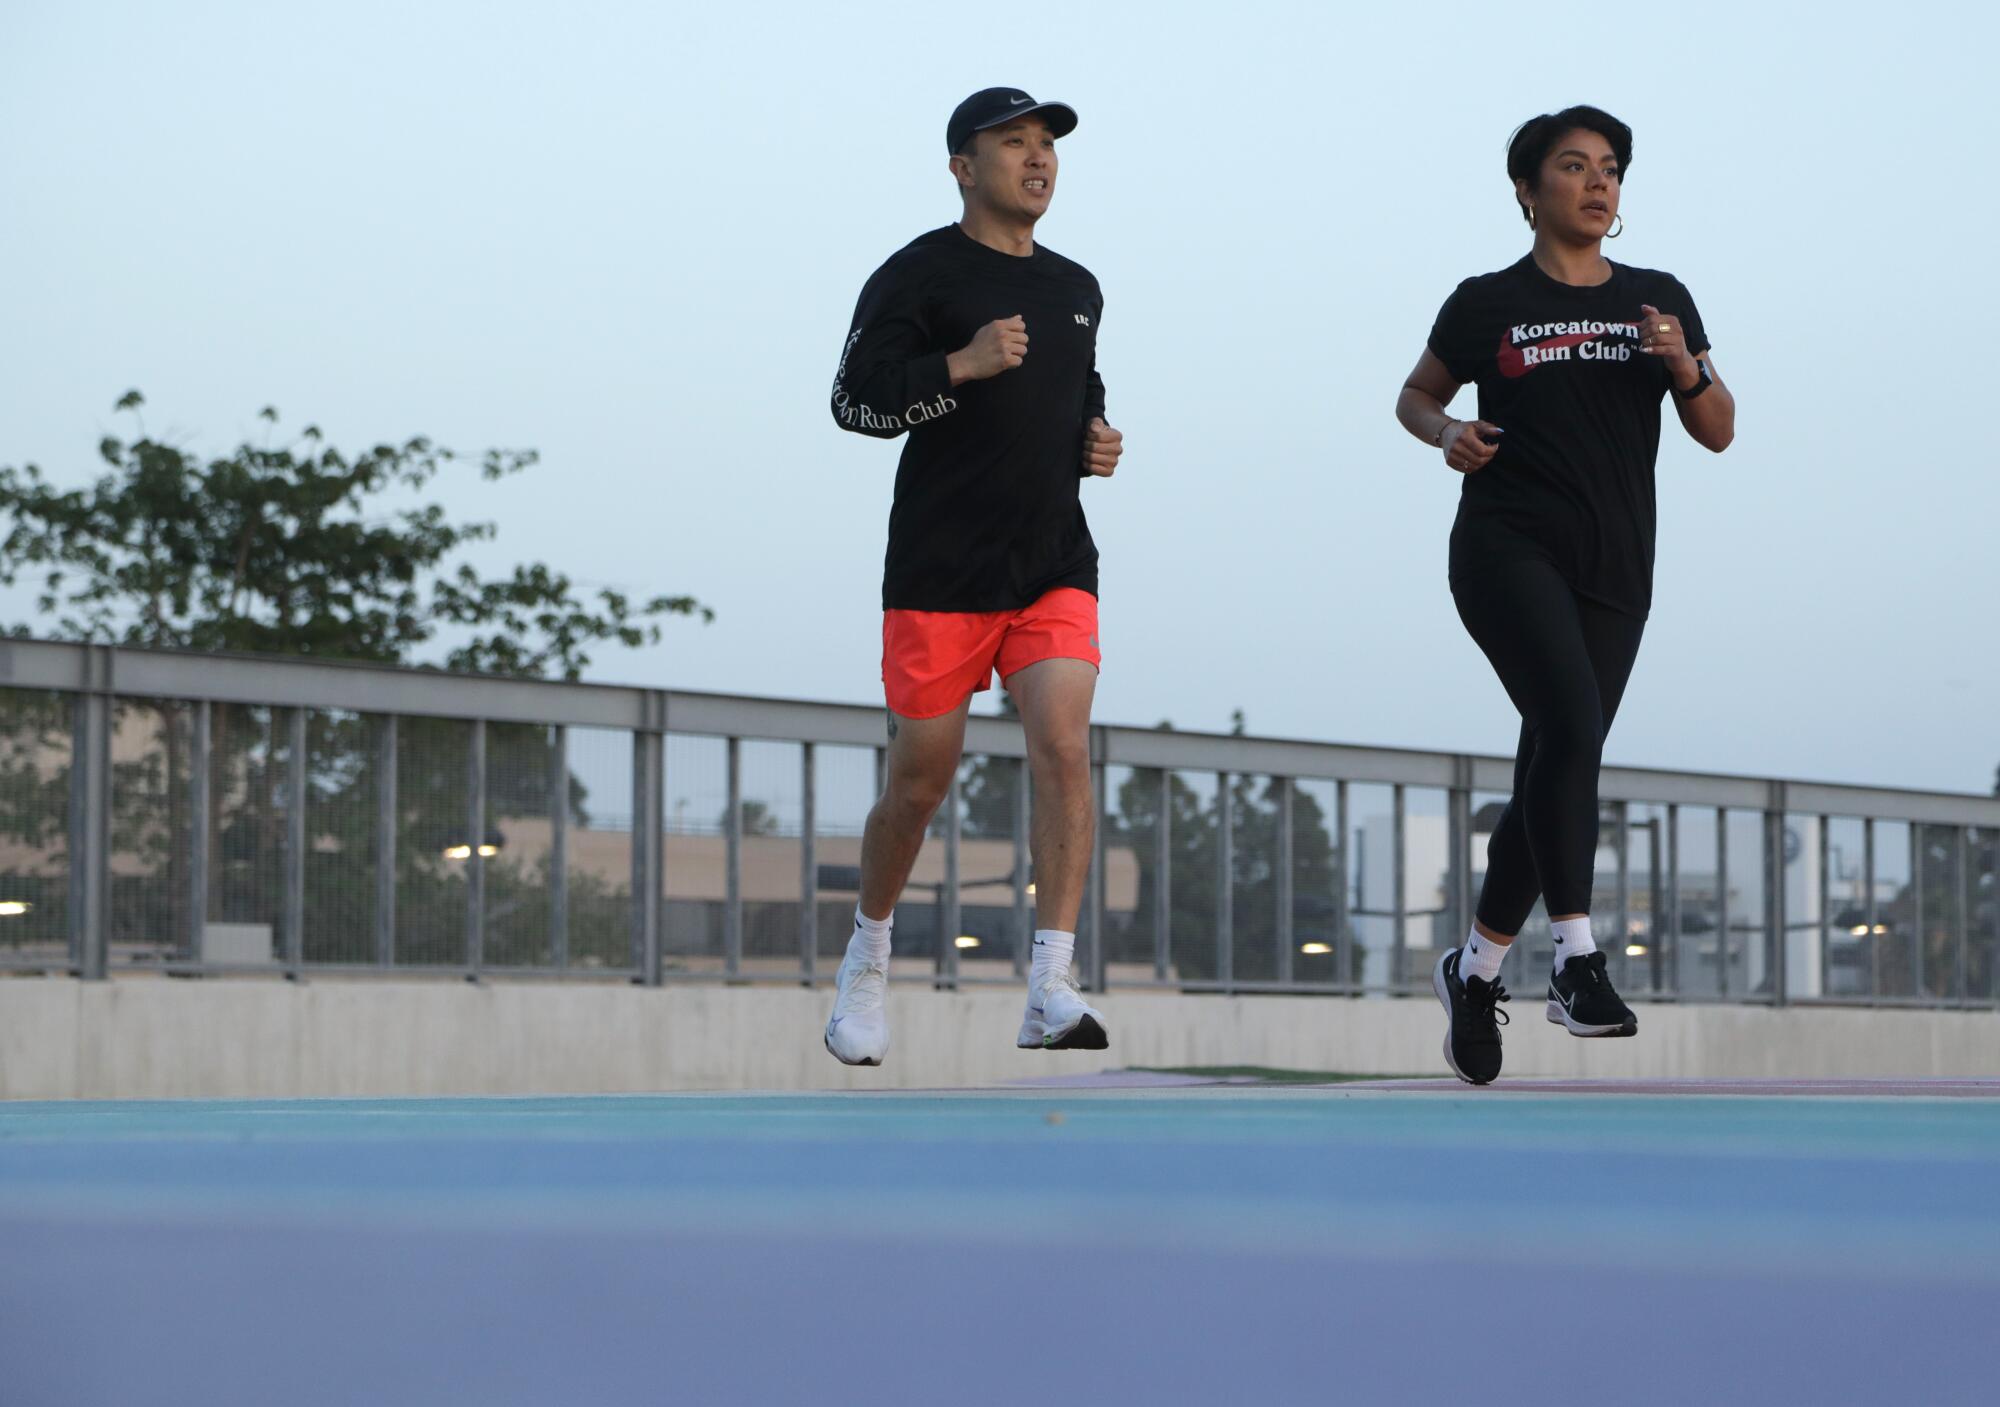 A man and a woman, members of a run club, go jogging.